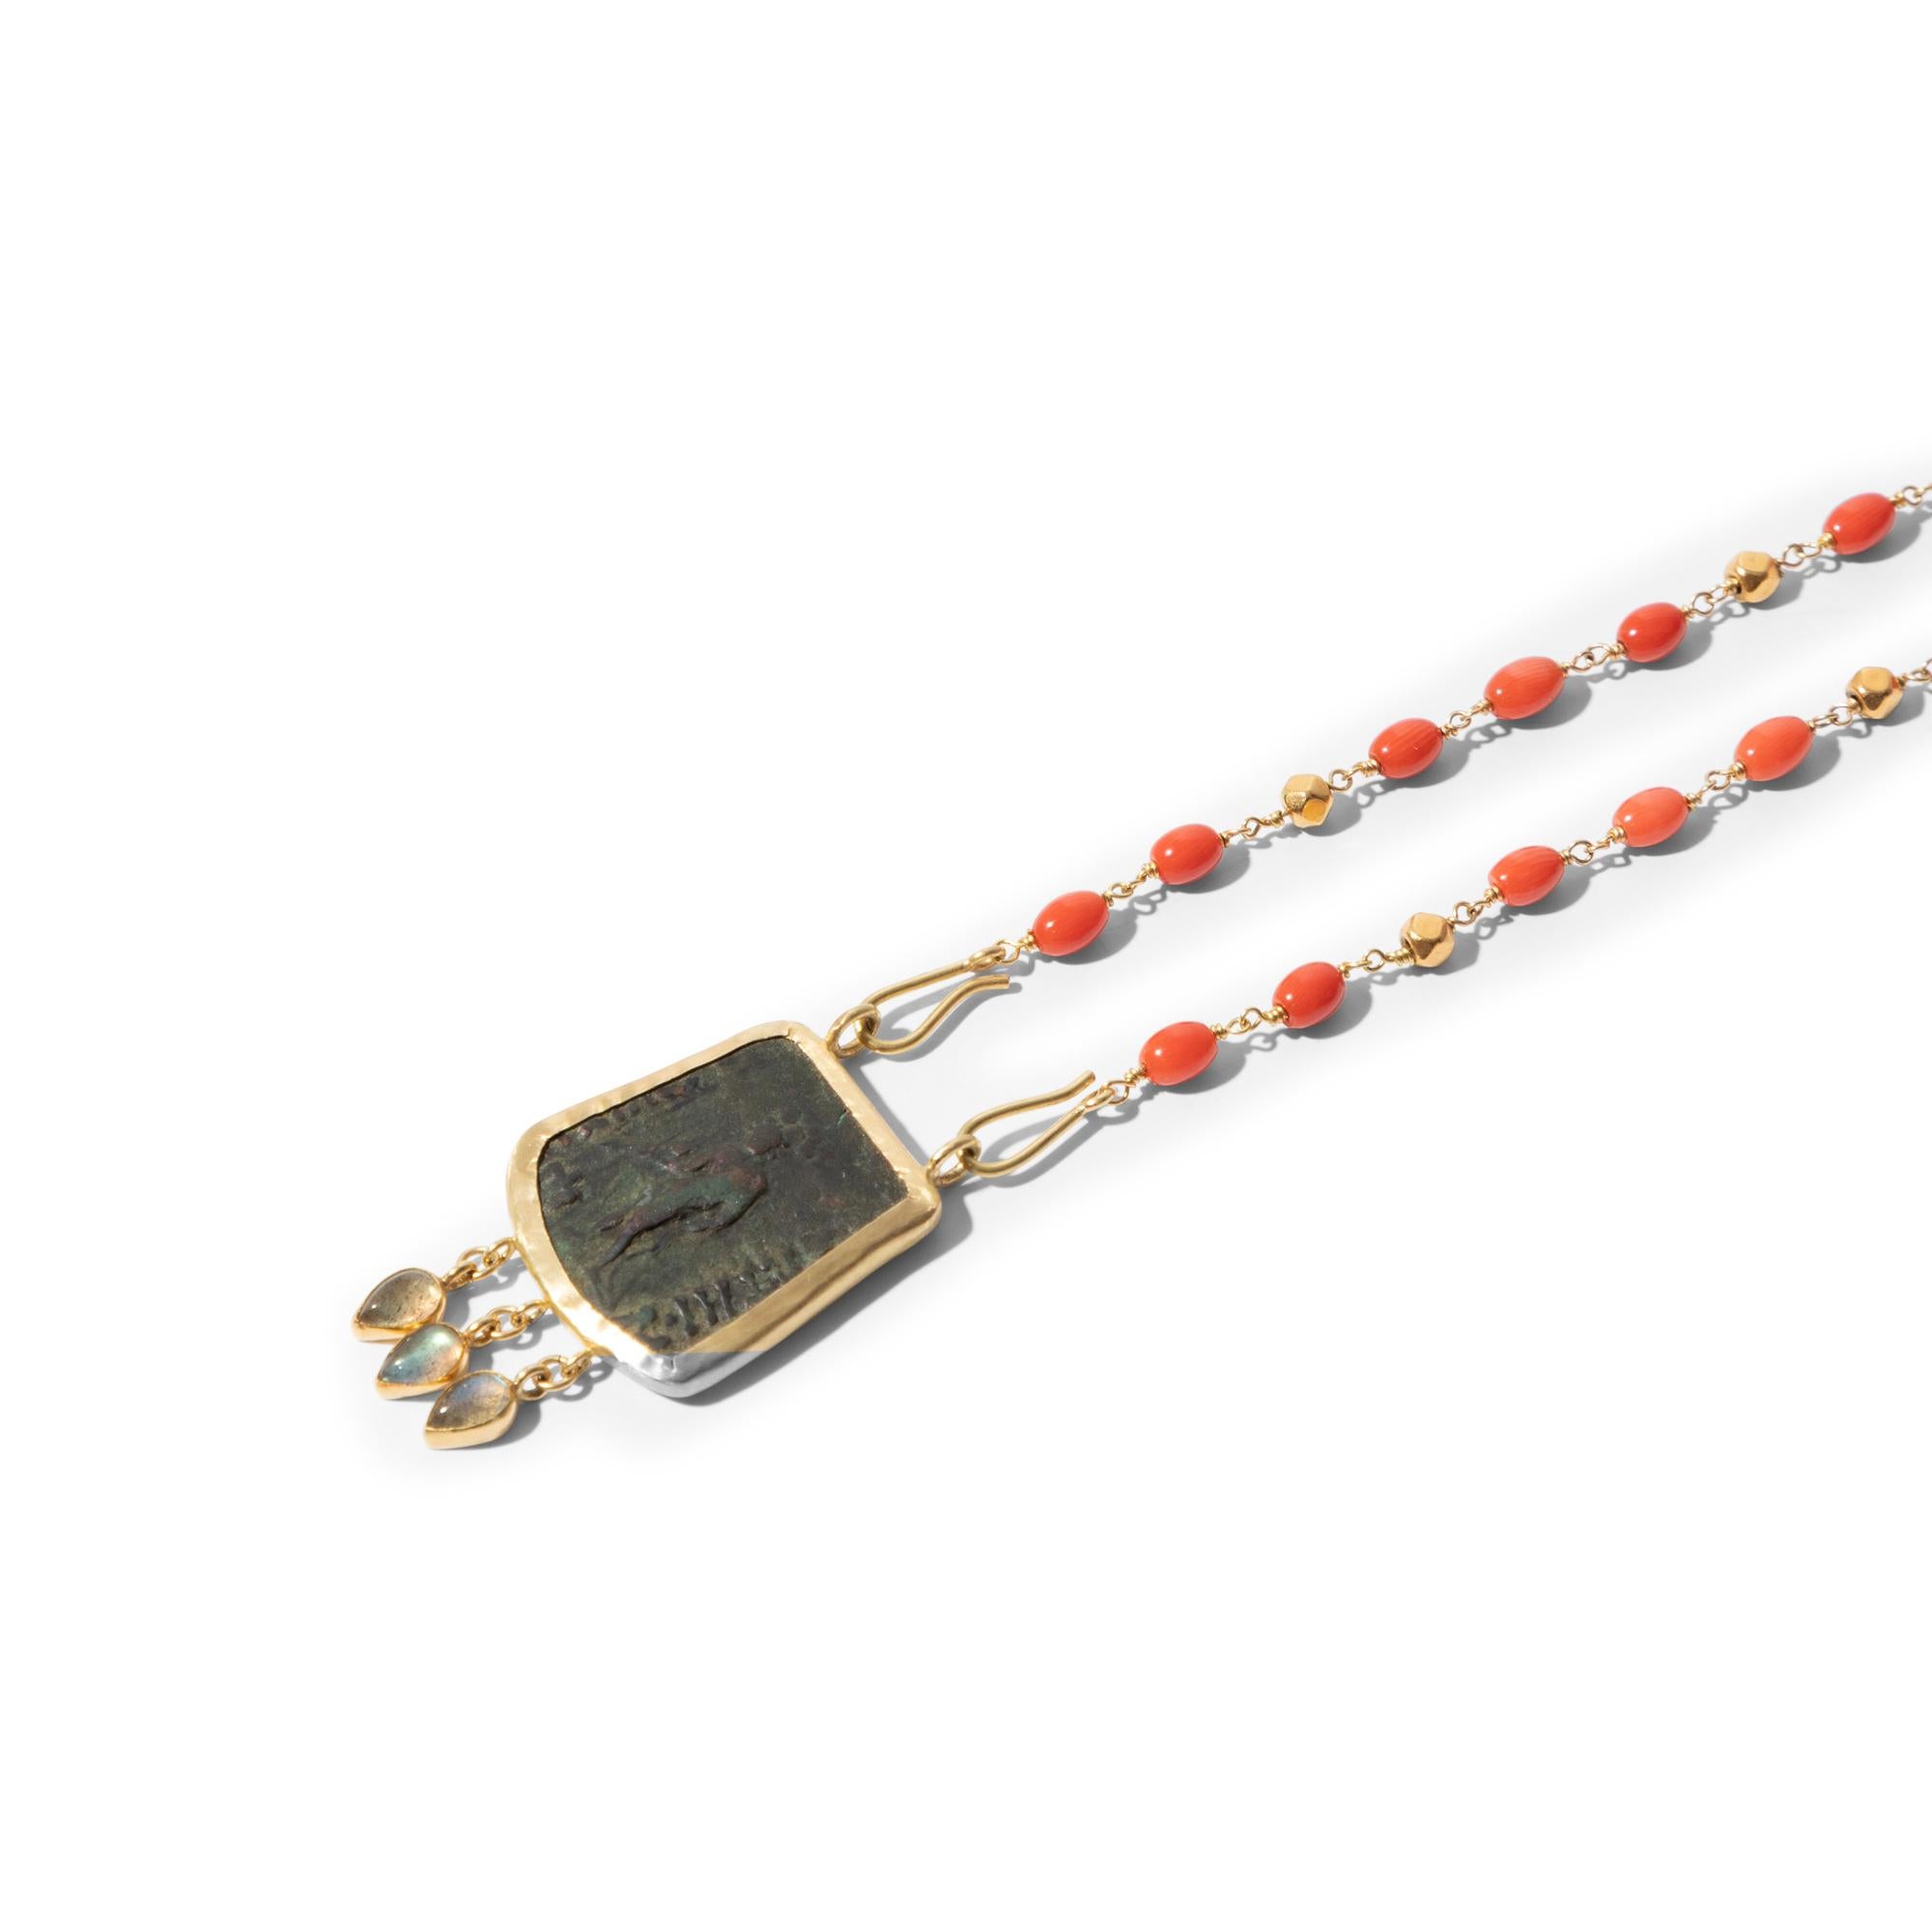 One of a kind necklace with delicate coral and gold beads wire-wrapped on gold wire. The detachable antique coin with an image on both sides is enhanced with a small fringe of labradorite drops.  This unique and versatile necklace which can be worn